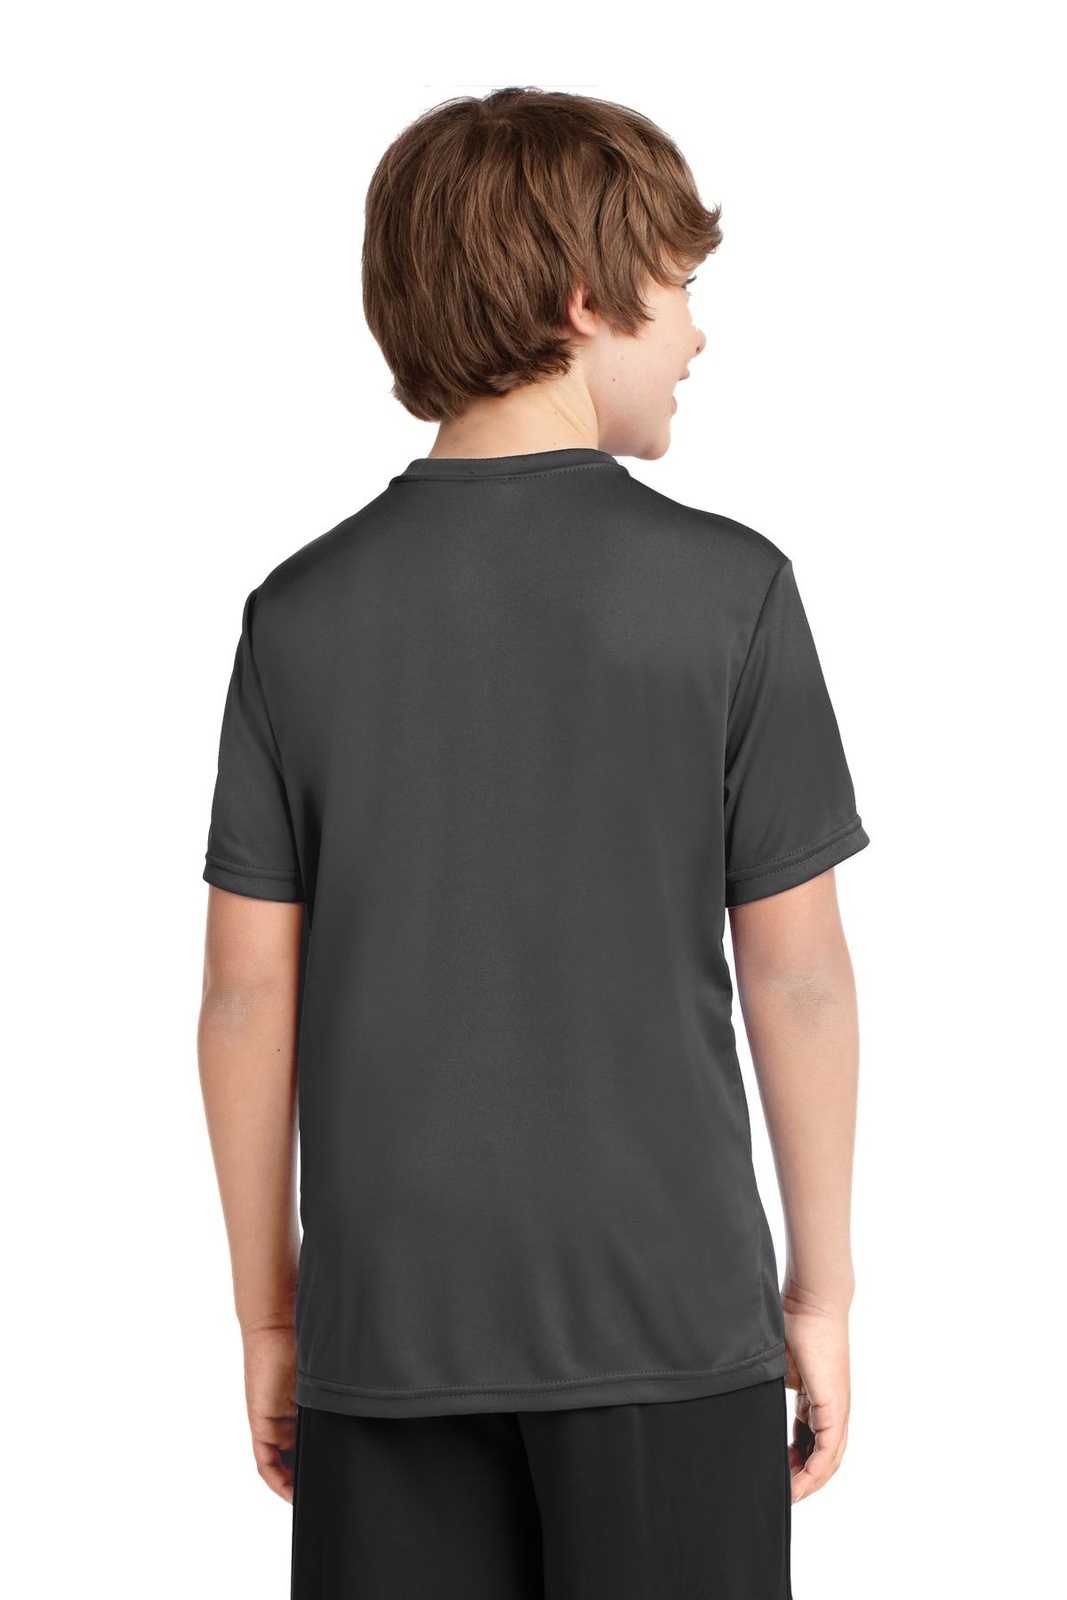 Port &amp; Company PC380Y Youth Performance Tee - Charcoal - HIT a Double - 2